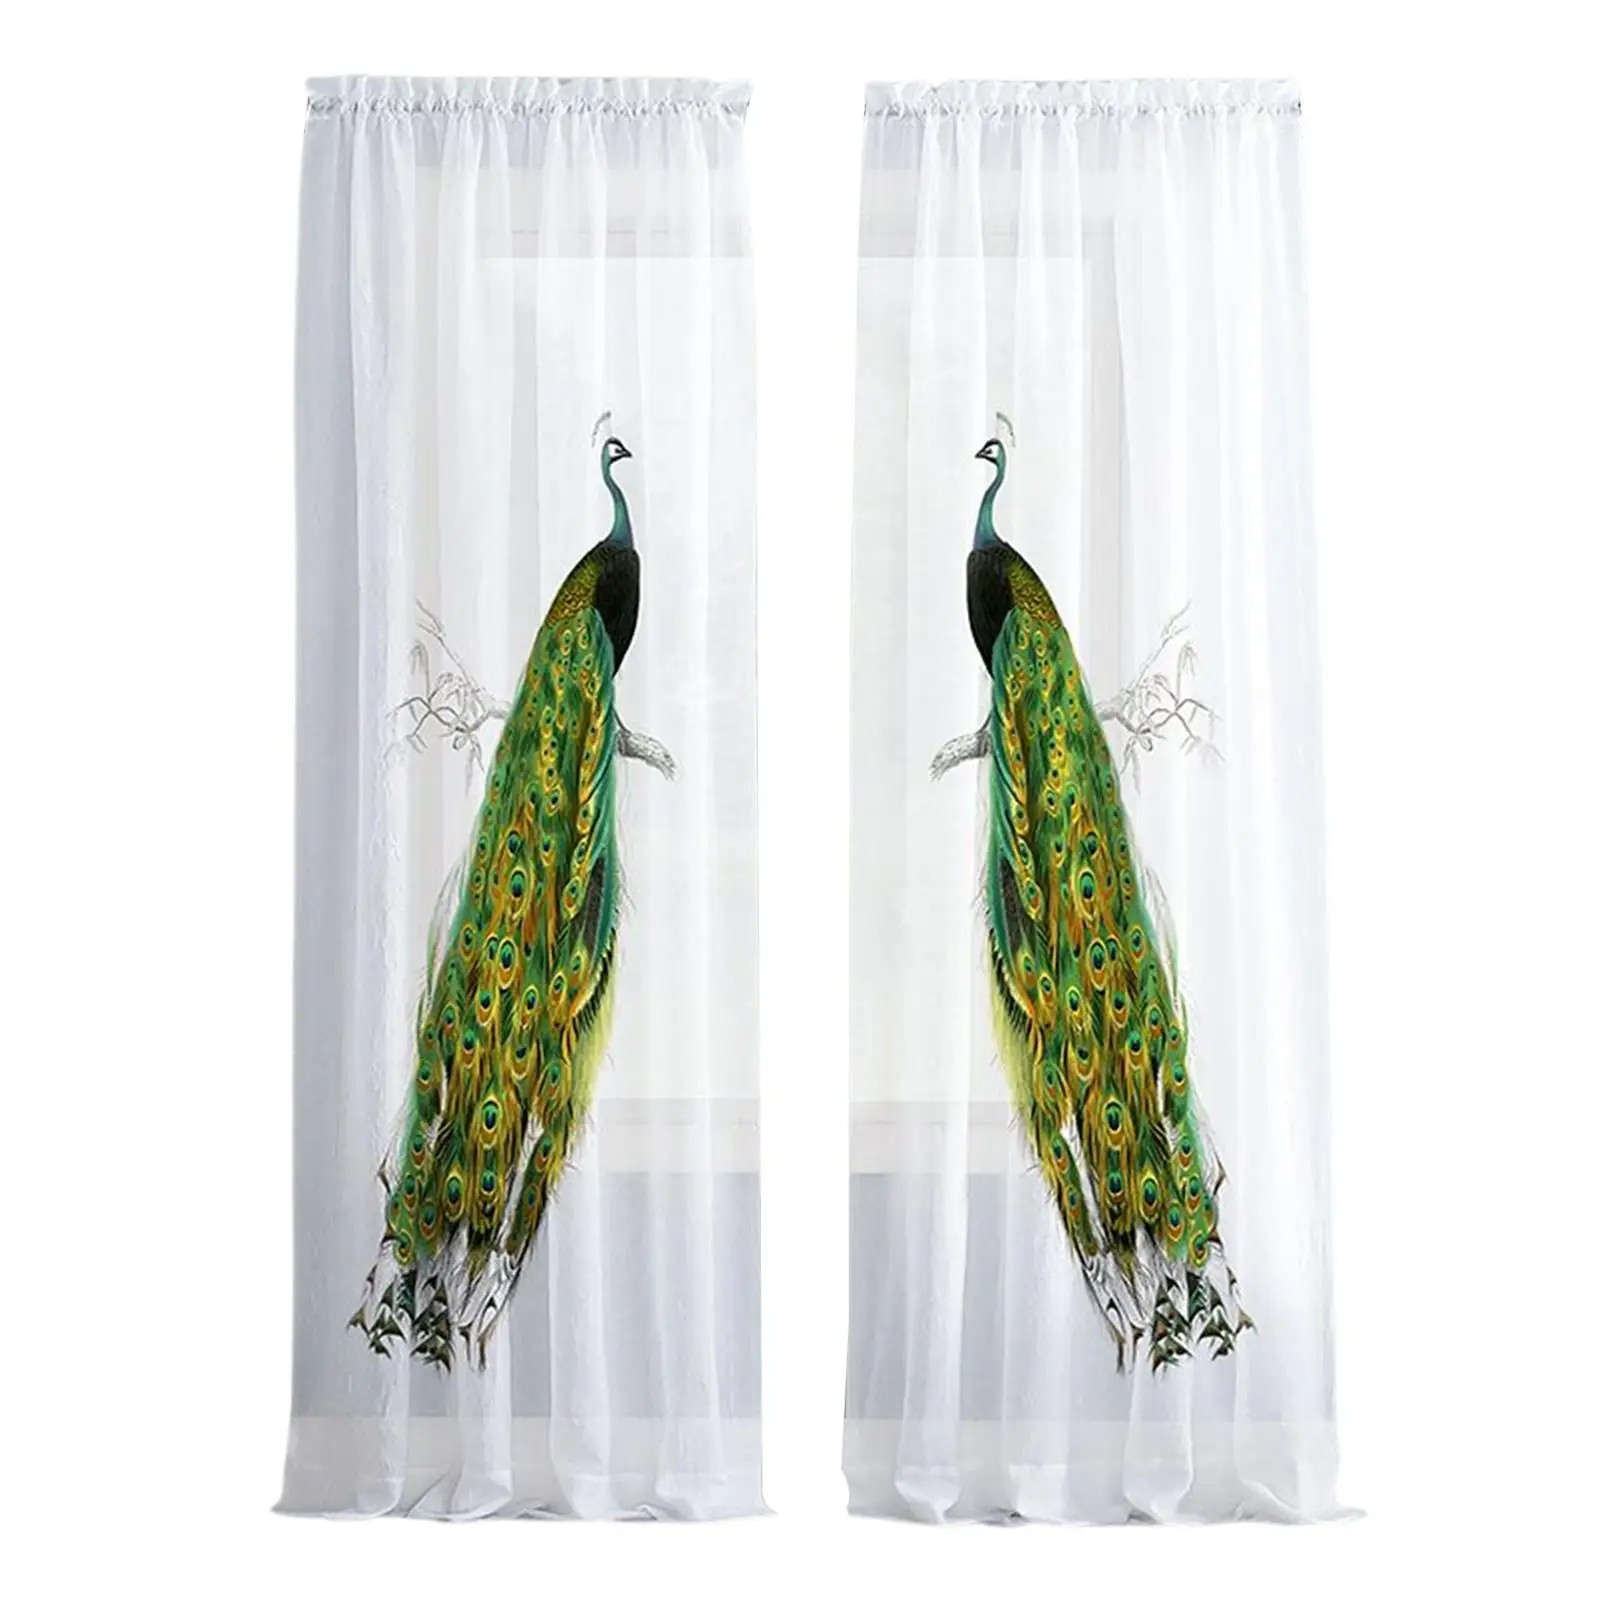 2x Sheer Curtain Peacock Pattern Curtain Panels for Kitchen Laundry Room Nursery